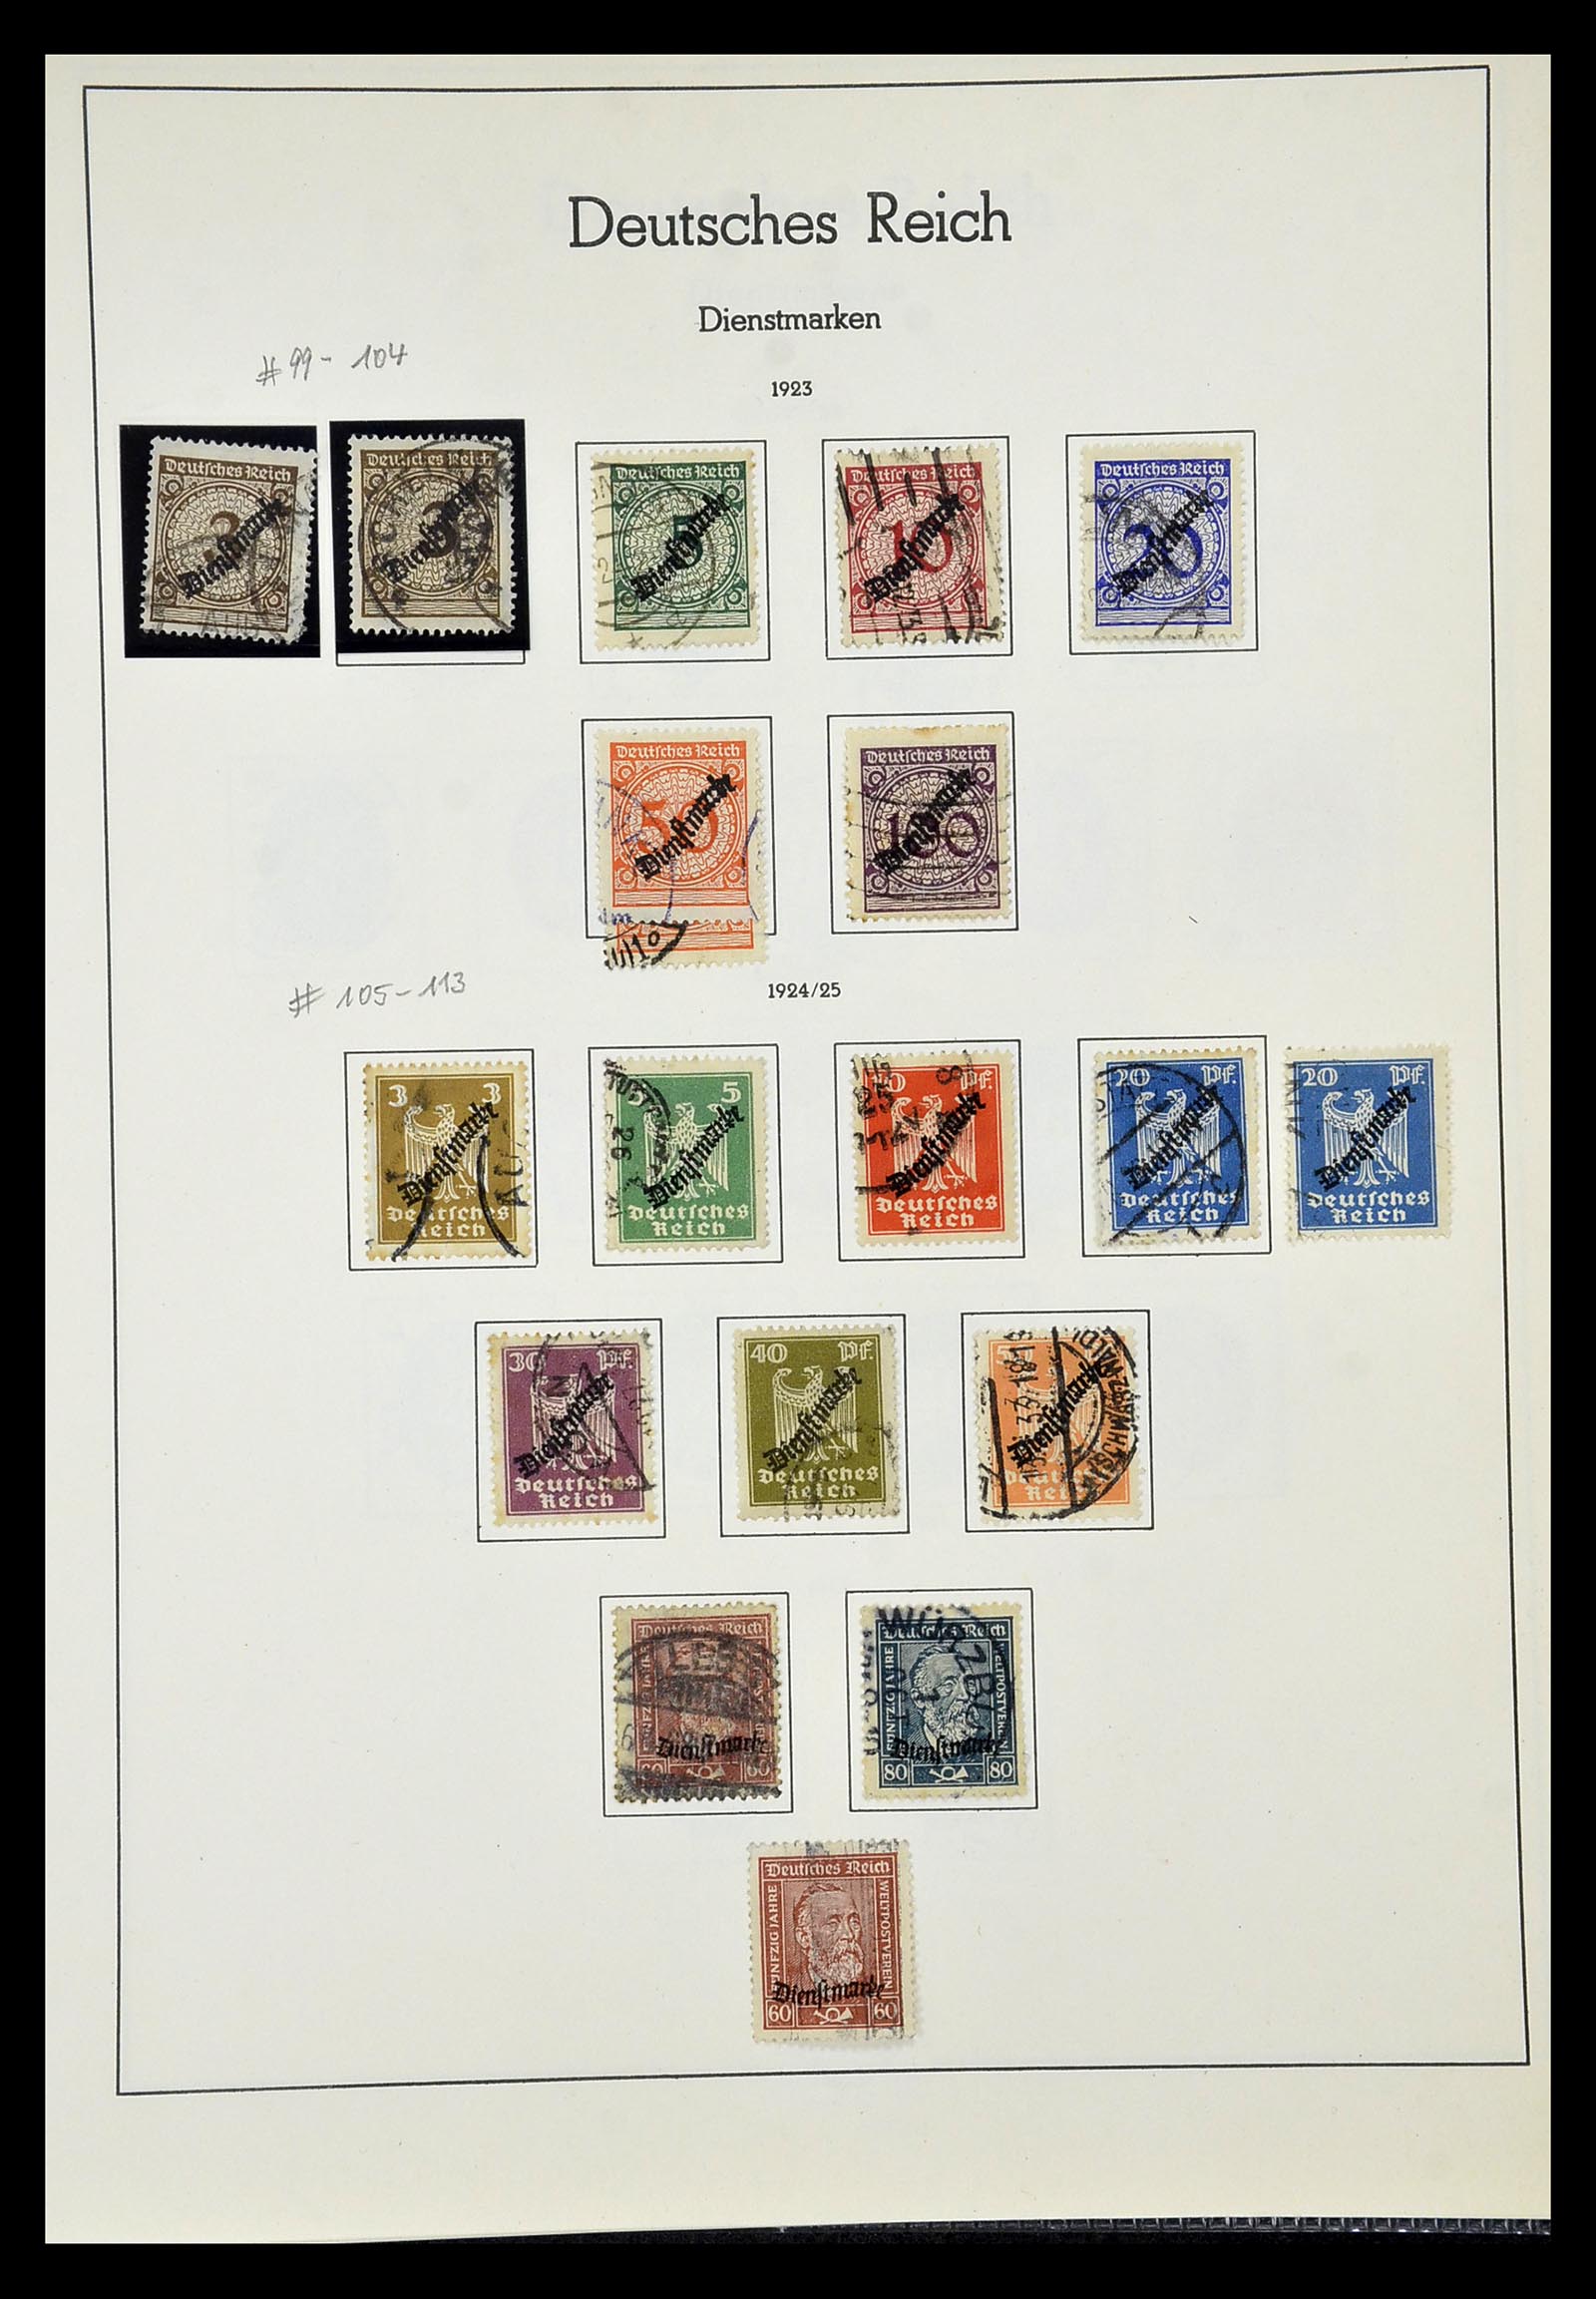 35016 016 - Stamp Collection 35016 Duitse Rijk service stamps 1903-1942.